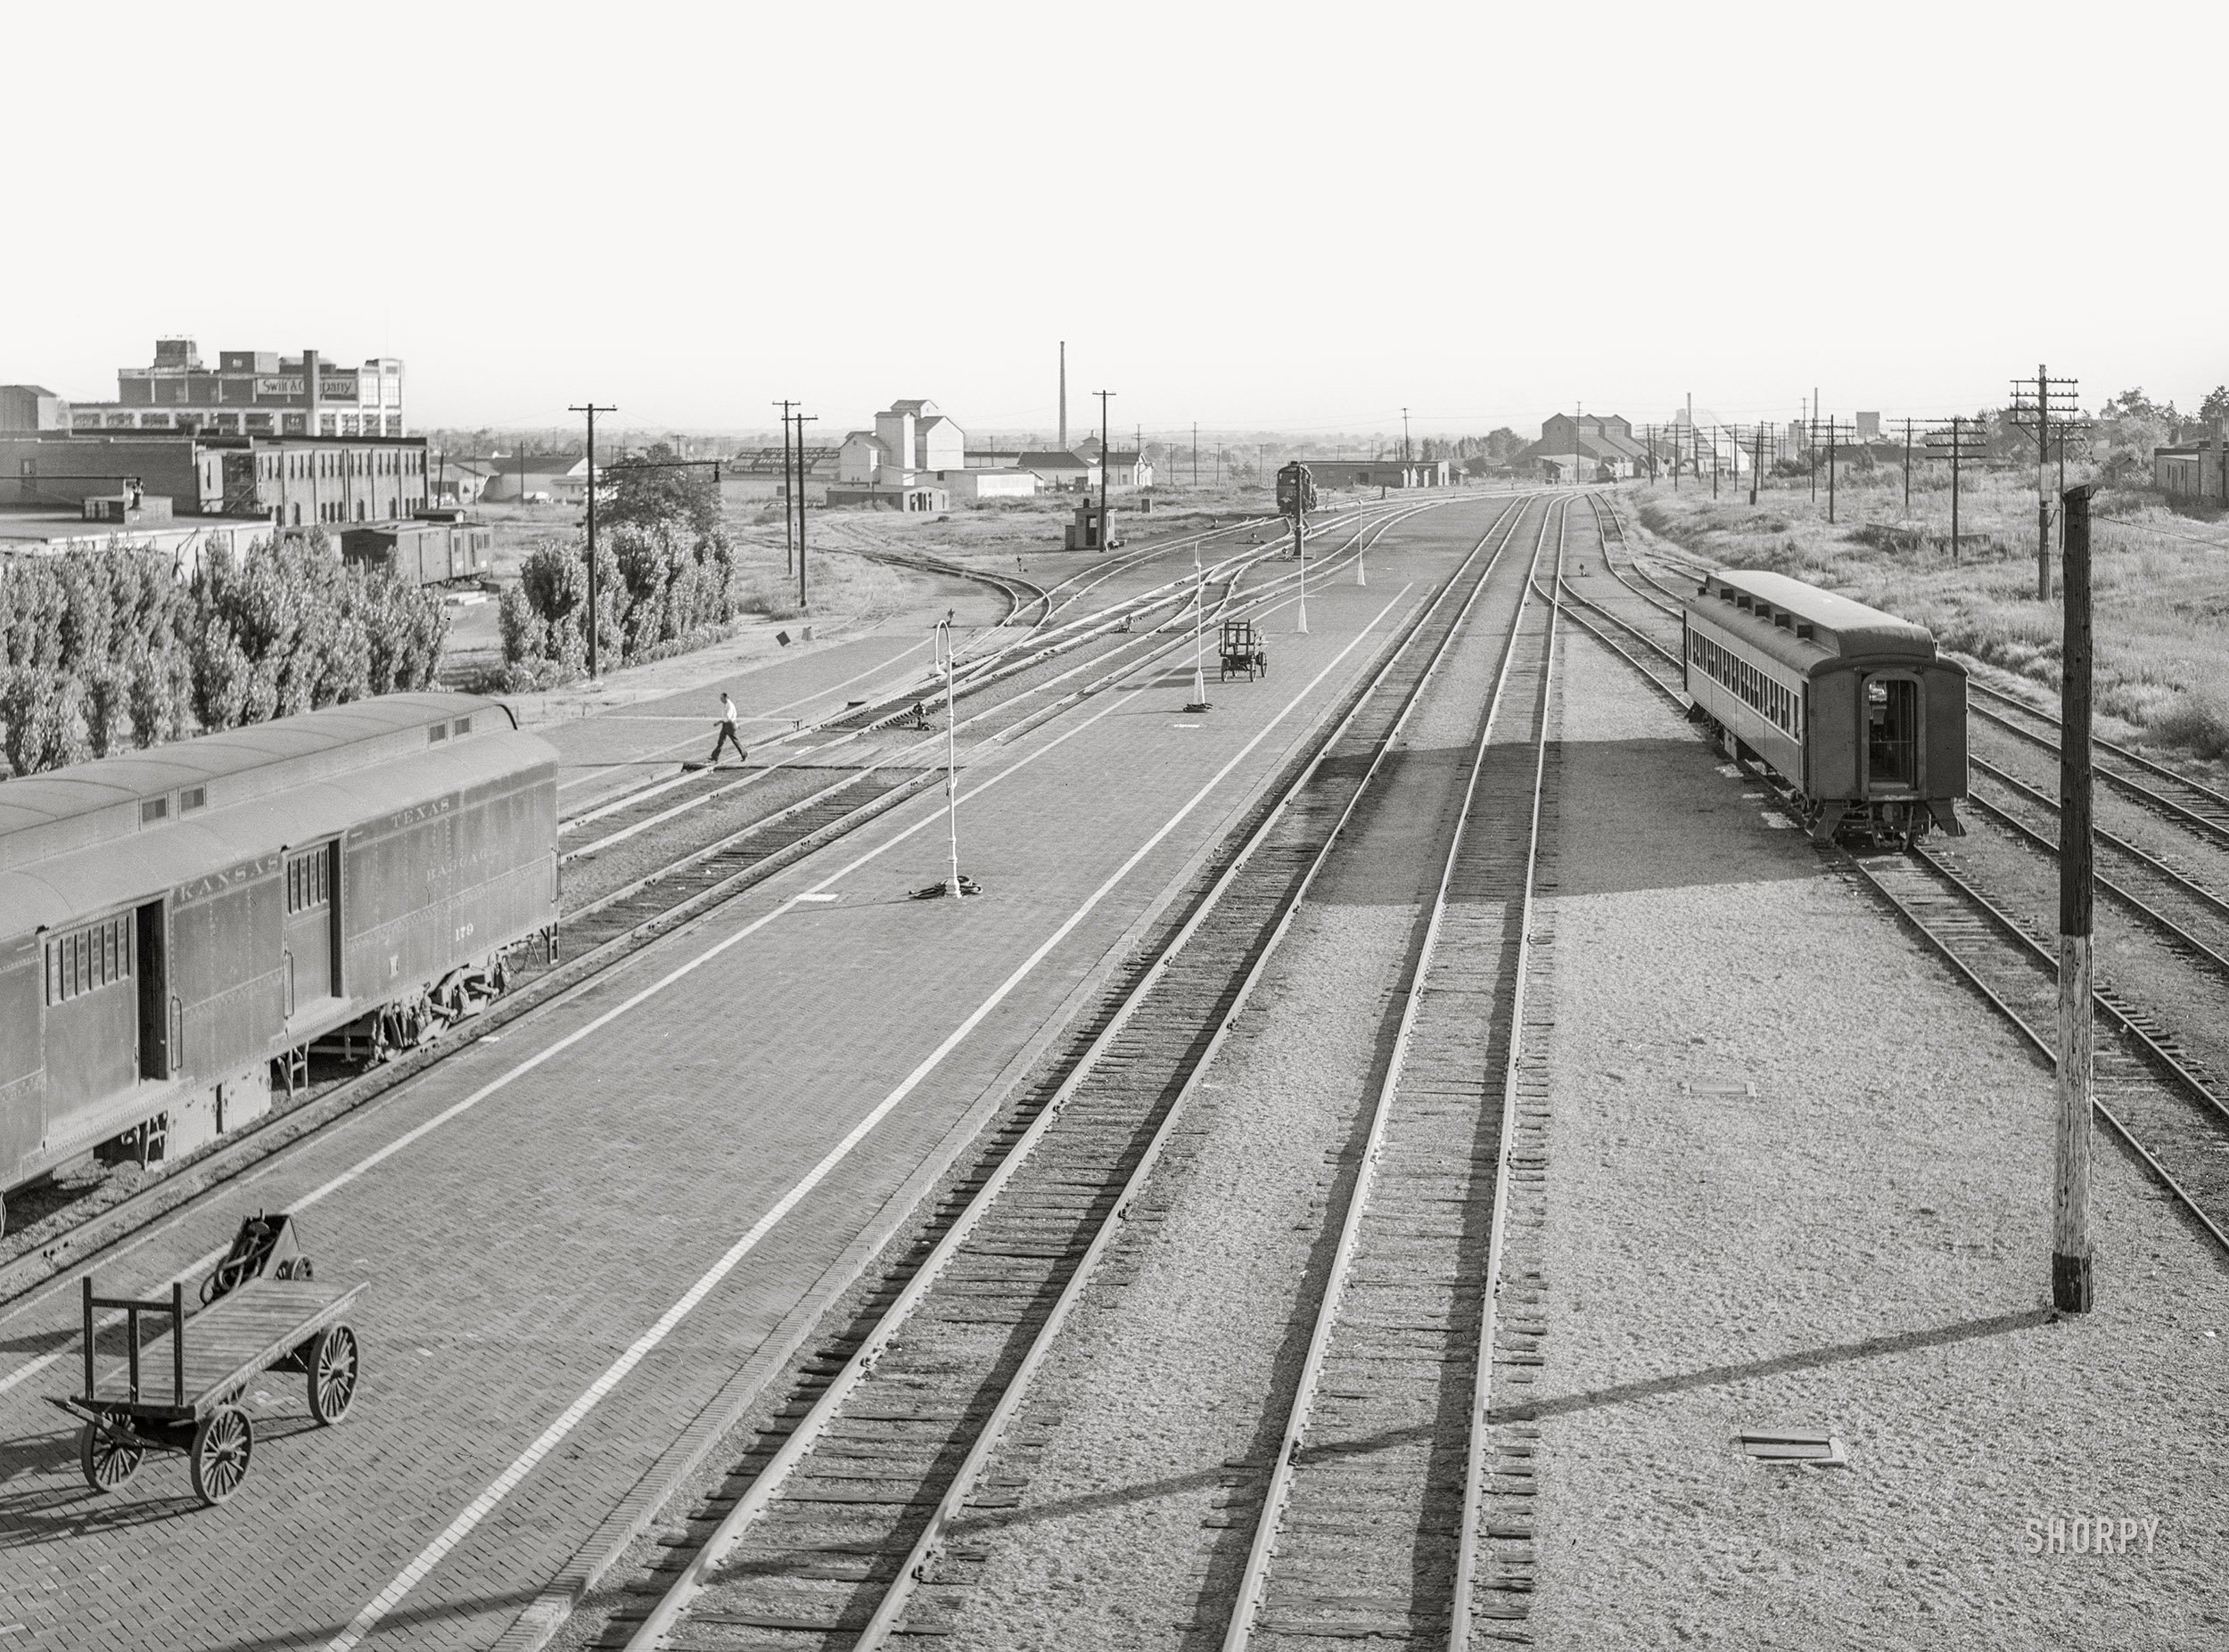 July 1939. "Railroad yards. Muskogee, Oklahoma." Medium format acetate negative by Russell Lee for the Farm Security Administration. View full size.